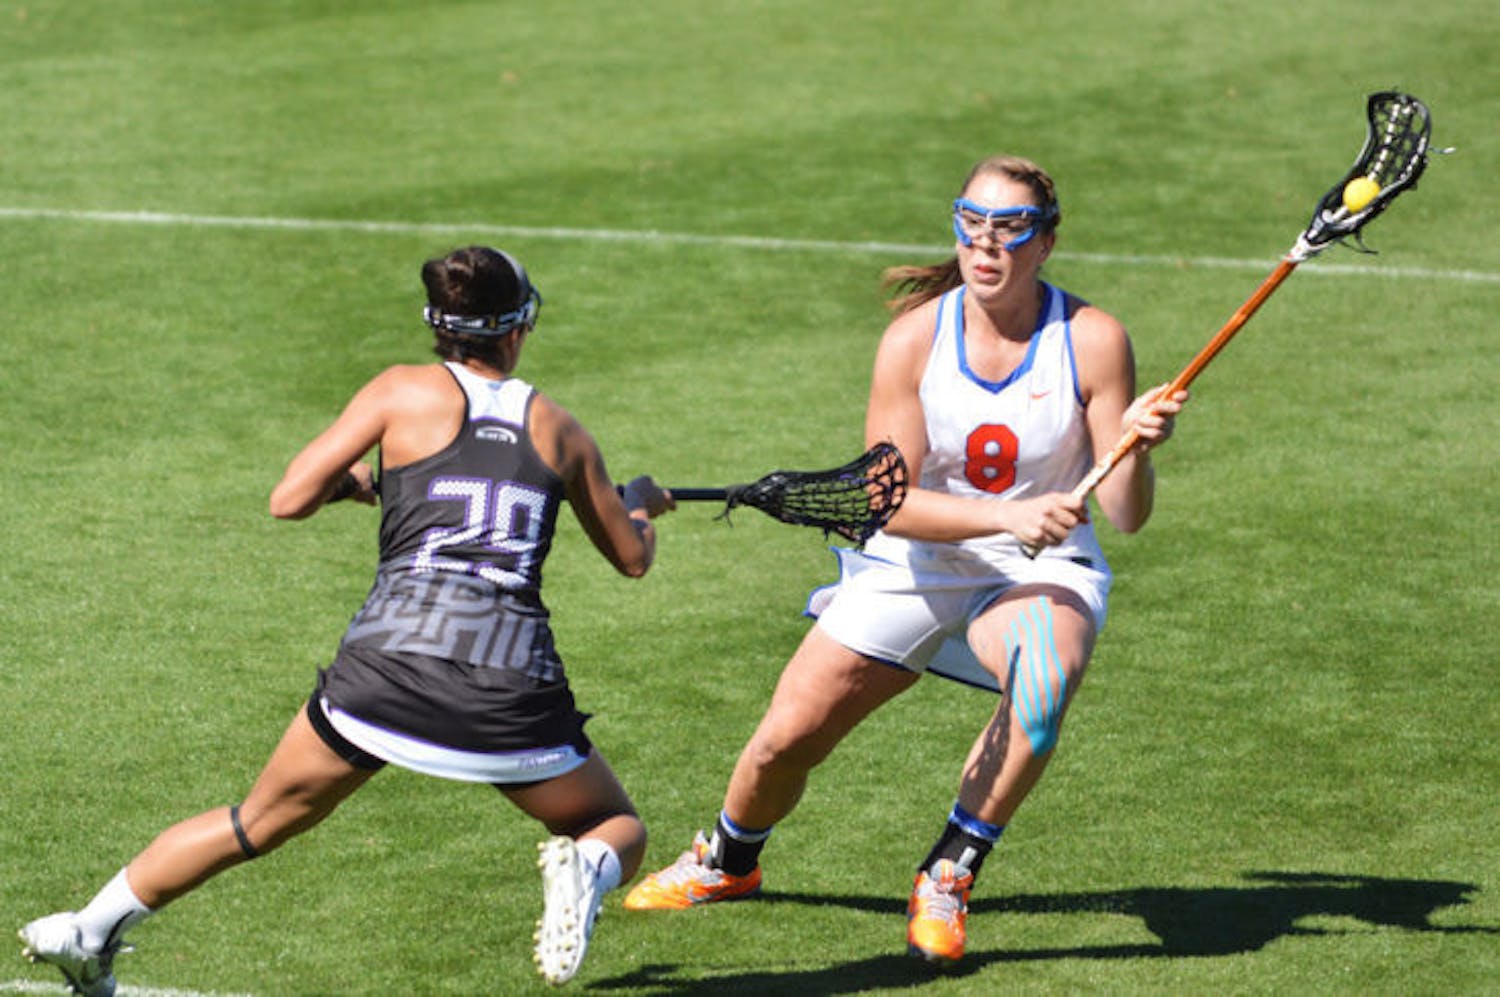 After graduating 12 seniors in 2013, Florida looked to 2014 as a year of rebuilding with 11 new players on the field. However, Florida ended conference play undefeated despite the lack of experience. The Gators won their fourth straight American Lacrosse Conference regular-season title, second conference tournament title and made a fourth straight NCAA Quarterfinals appearance.
Next season, Florida will still be fighting to be the No. 1 seed, but coach Amanda O’Leary and company will have to do so in their new conference: The Big East.